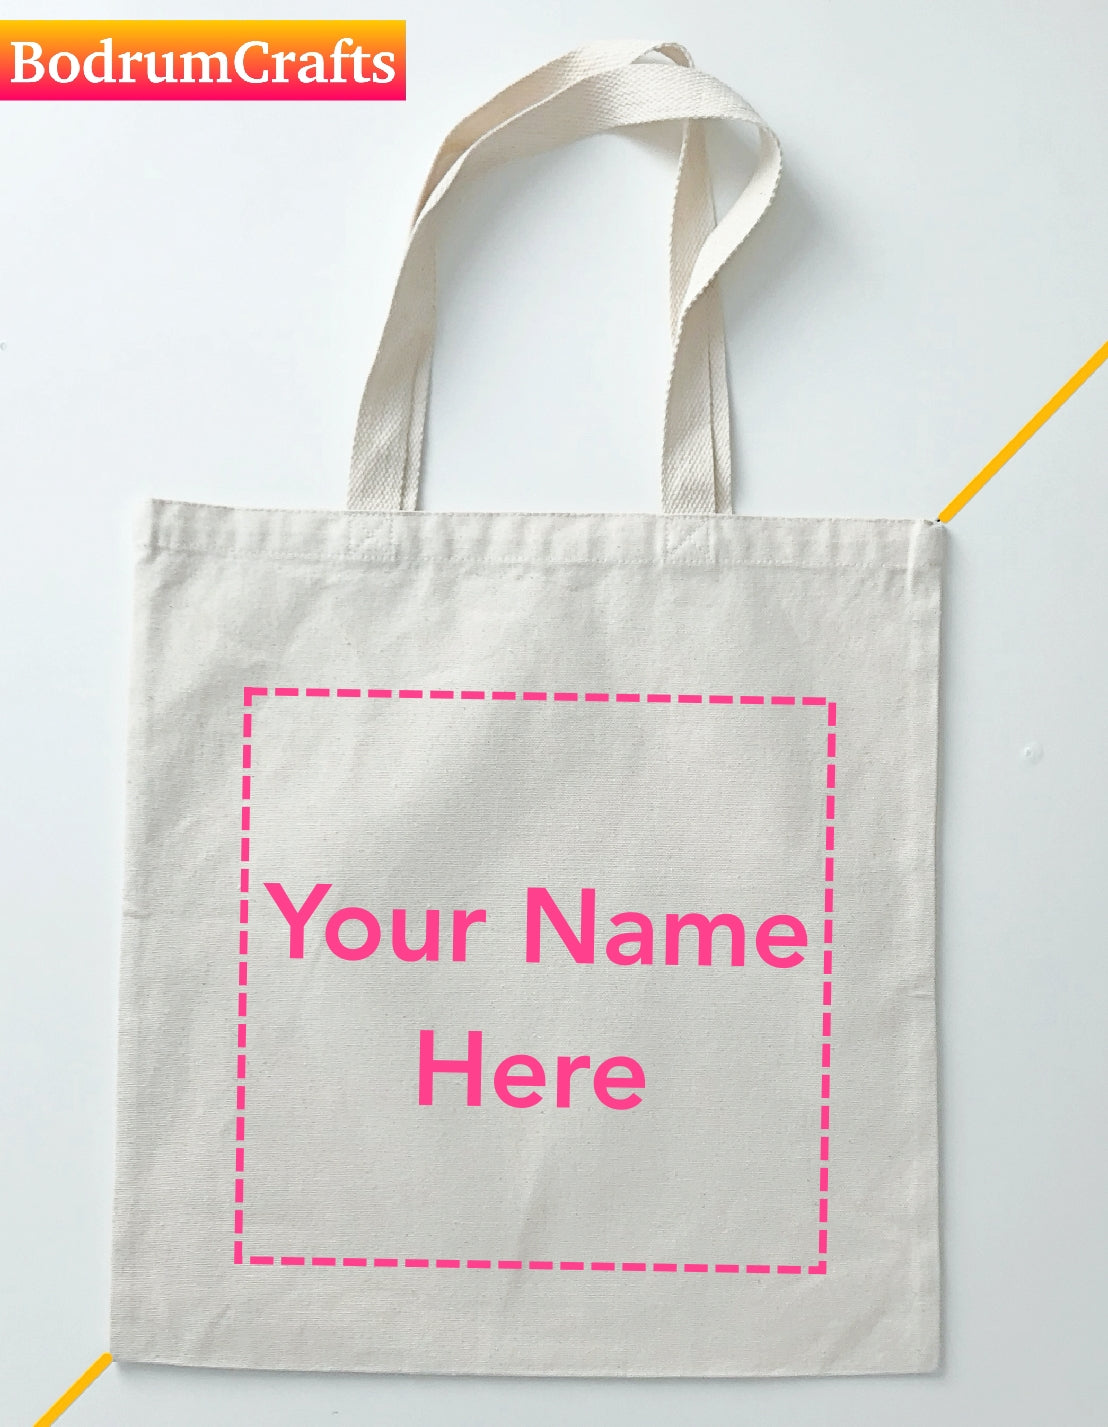 All About Me Company Personalized Monogram Tote Bag